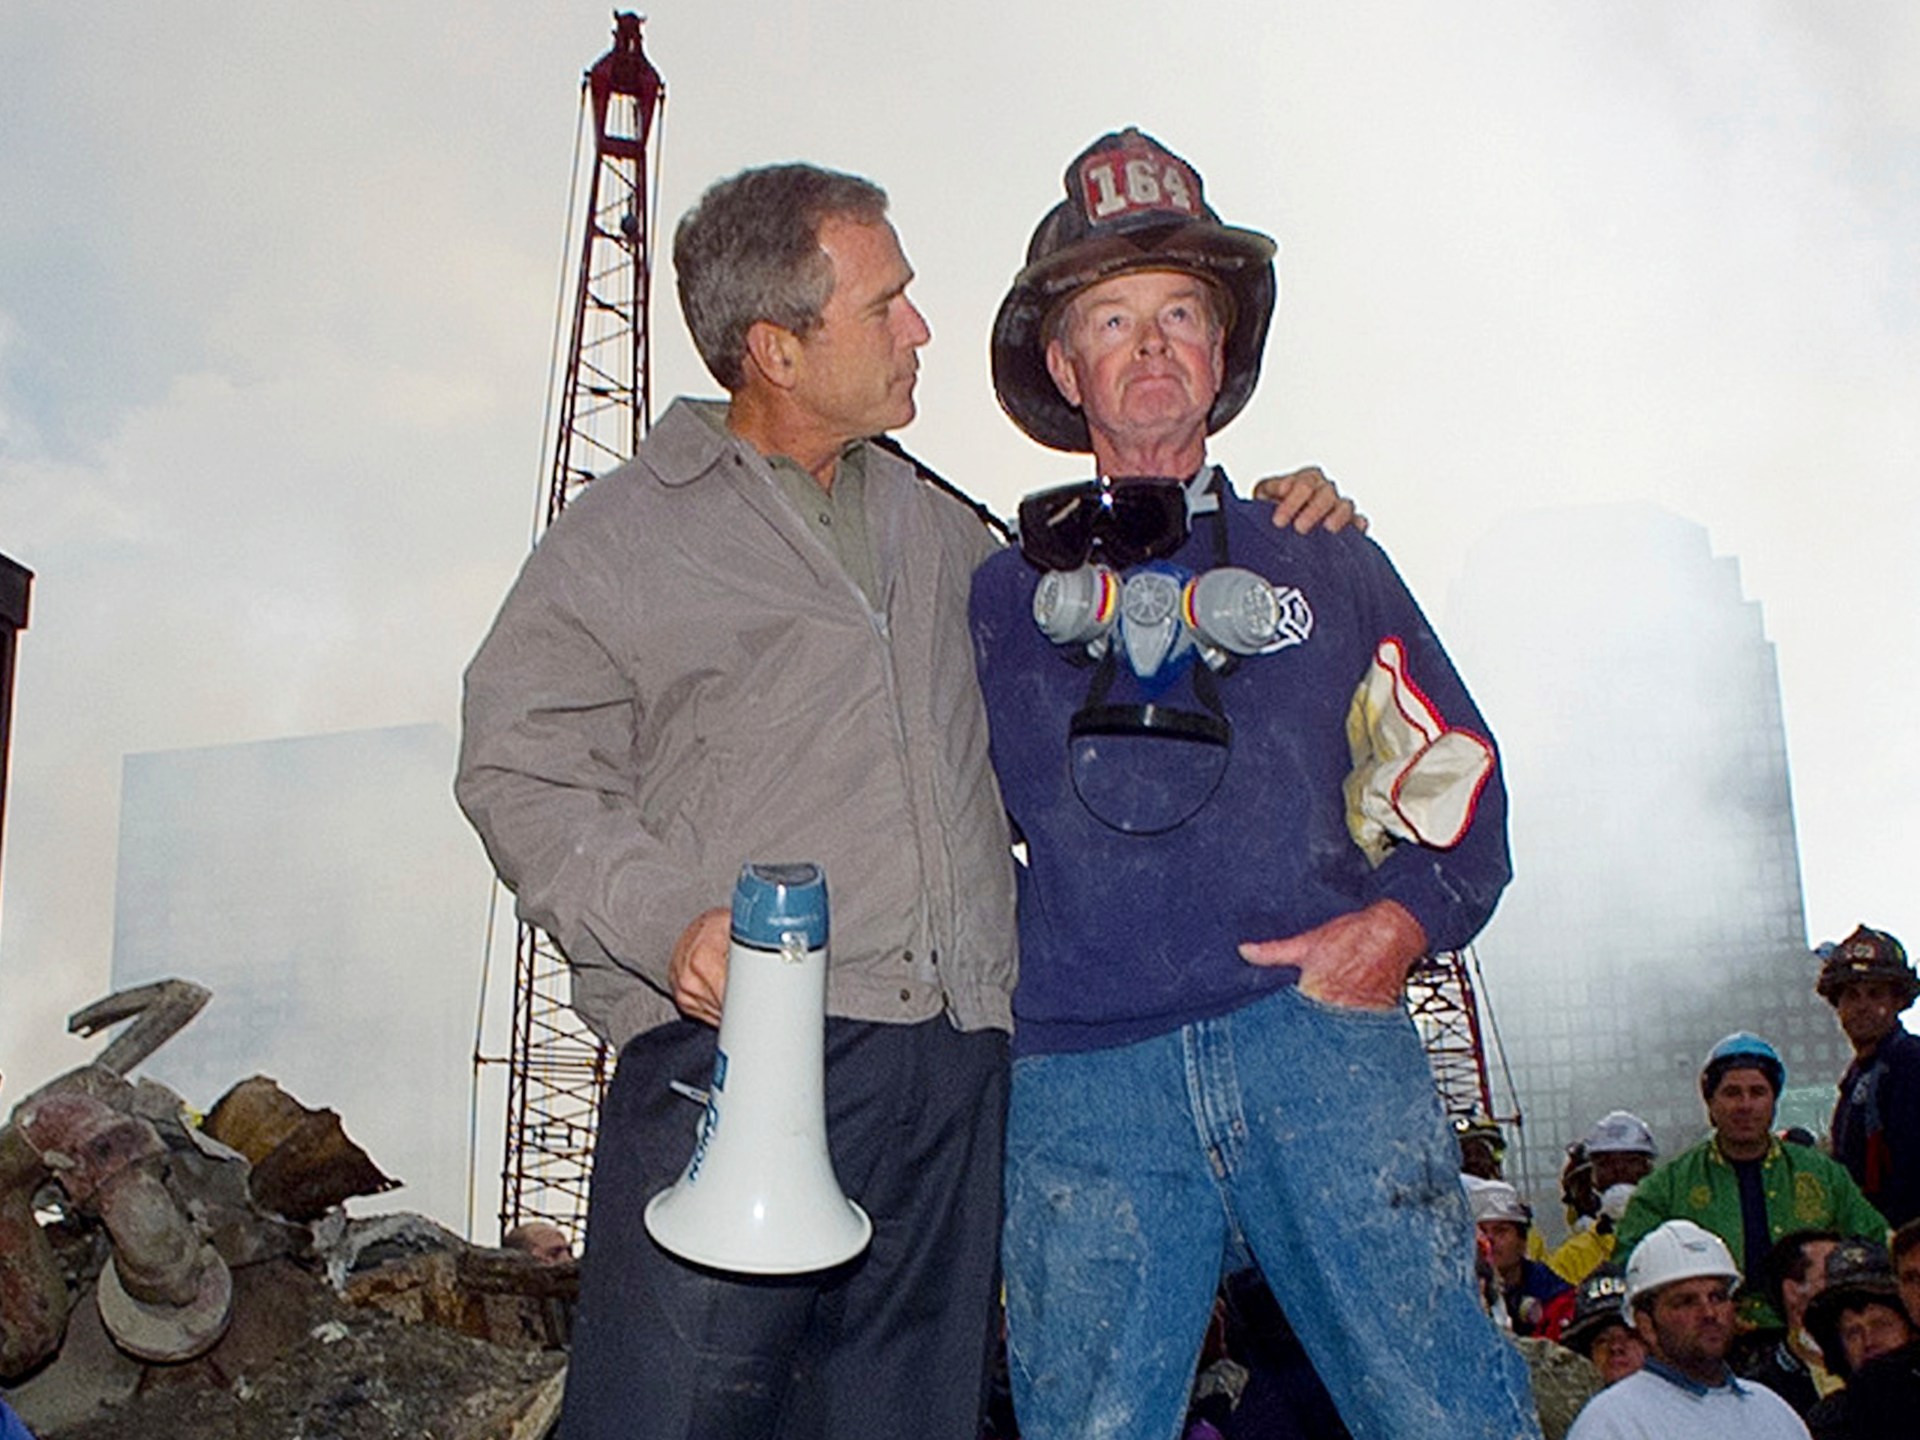 9/11 firefighter who stood next to Bush in famous images dies | News